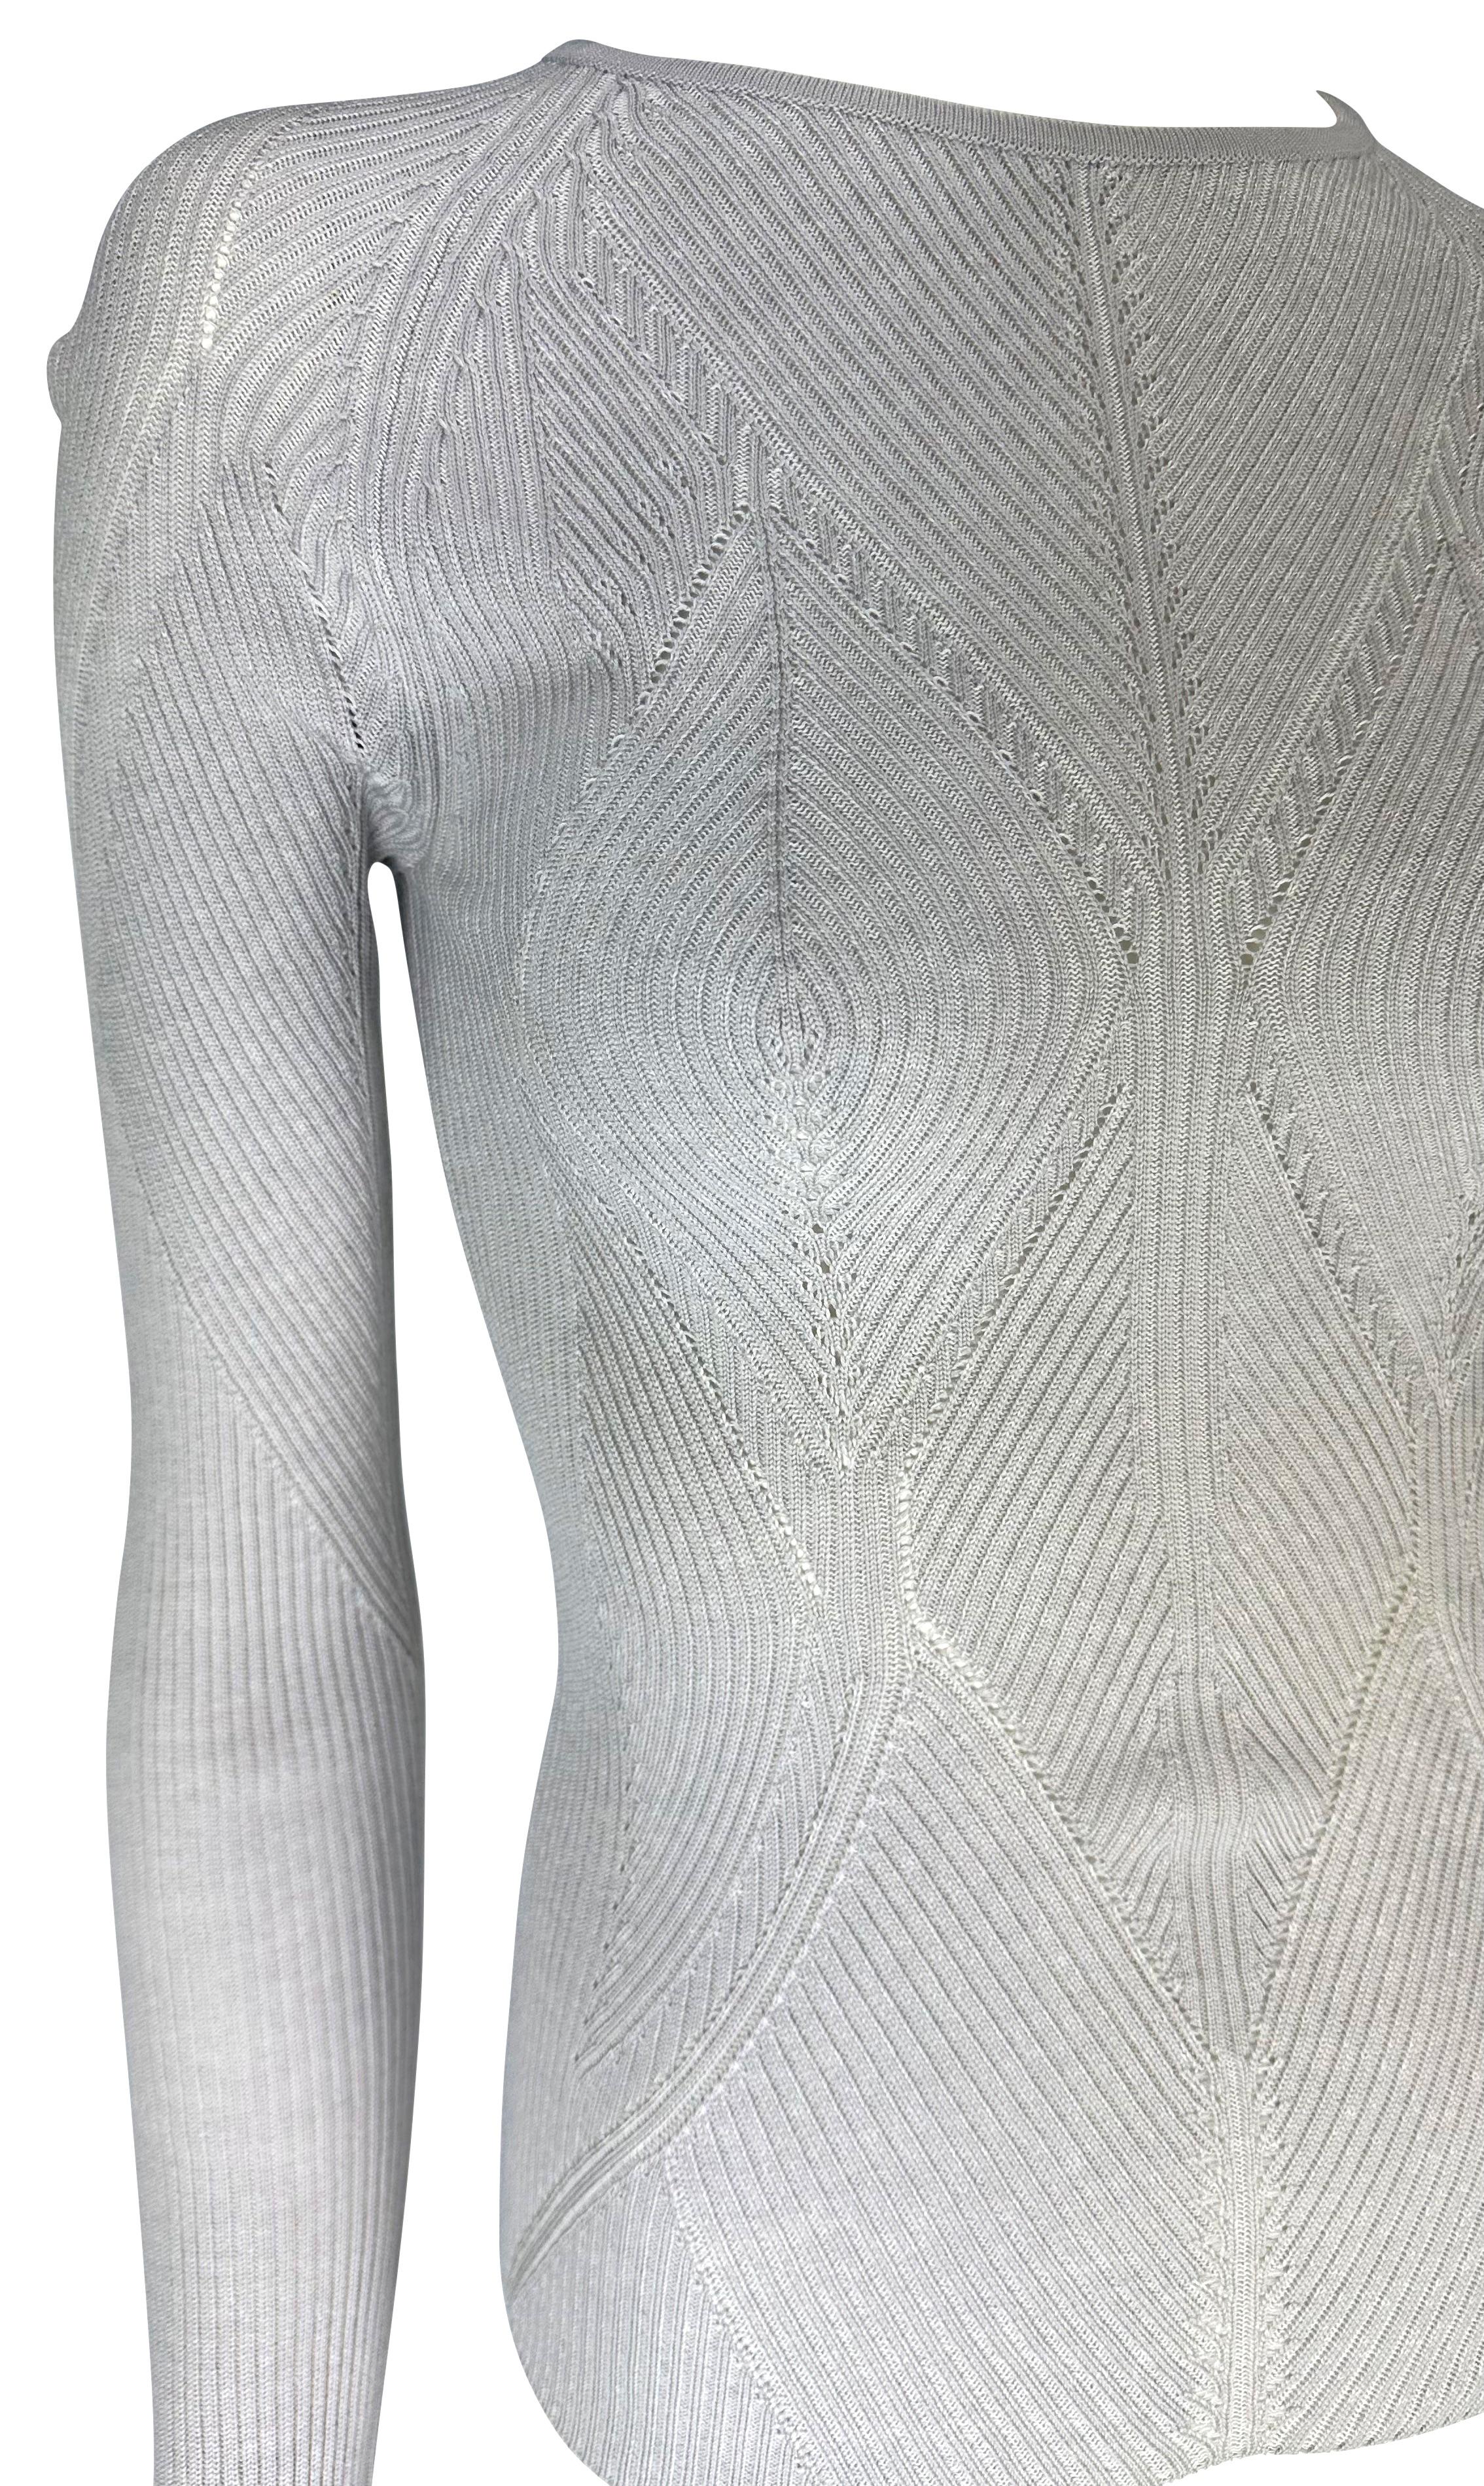 TheRealList presents: a beautiful lavendar knit Yves Saint Laurent sweater, designed by Tom Ford. From the Spring/Summer 2003 collection, this ribbed sweater features a diamond pattern that tactfully covers the breasts and provides a nude illusion.